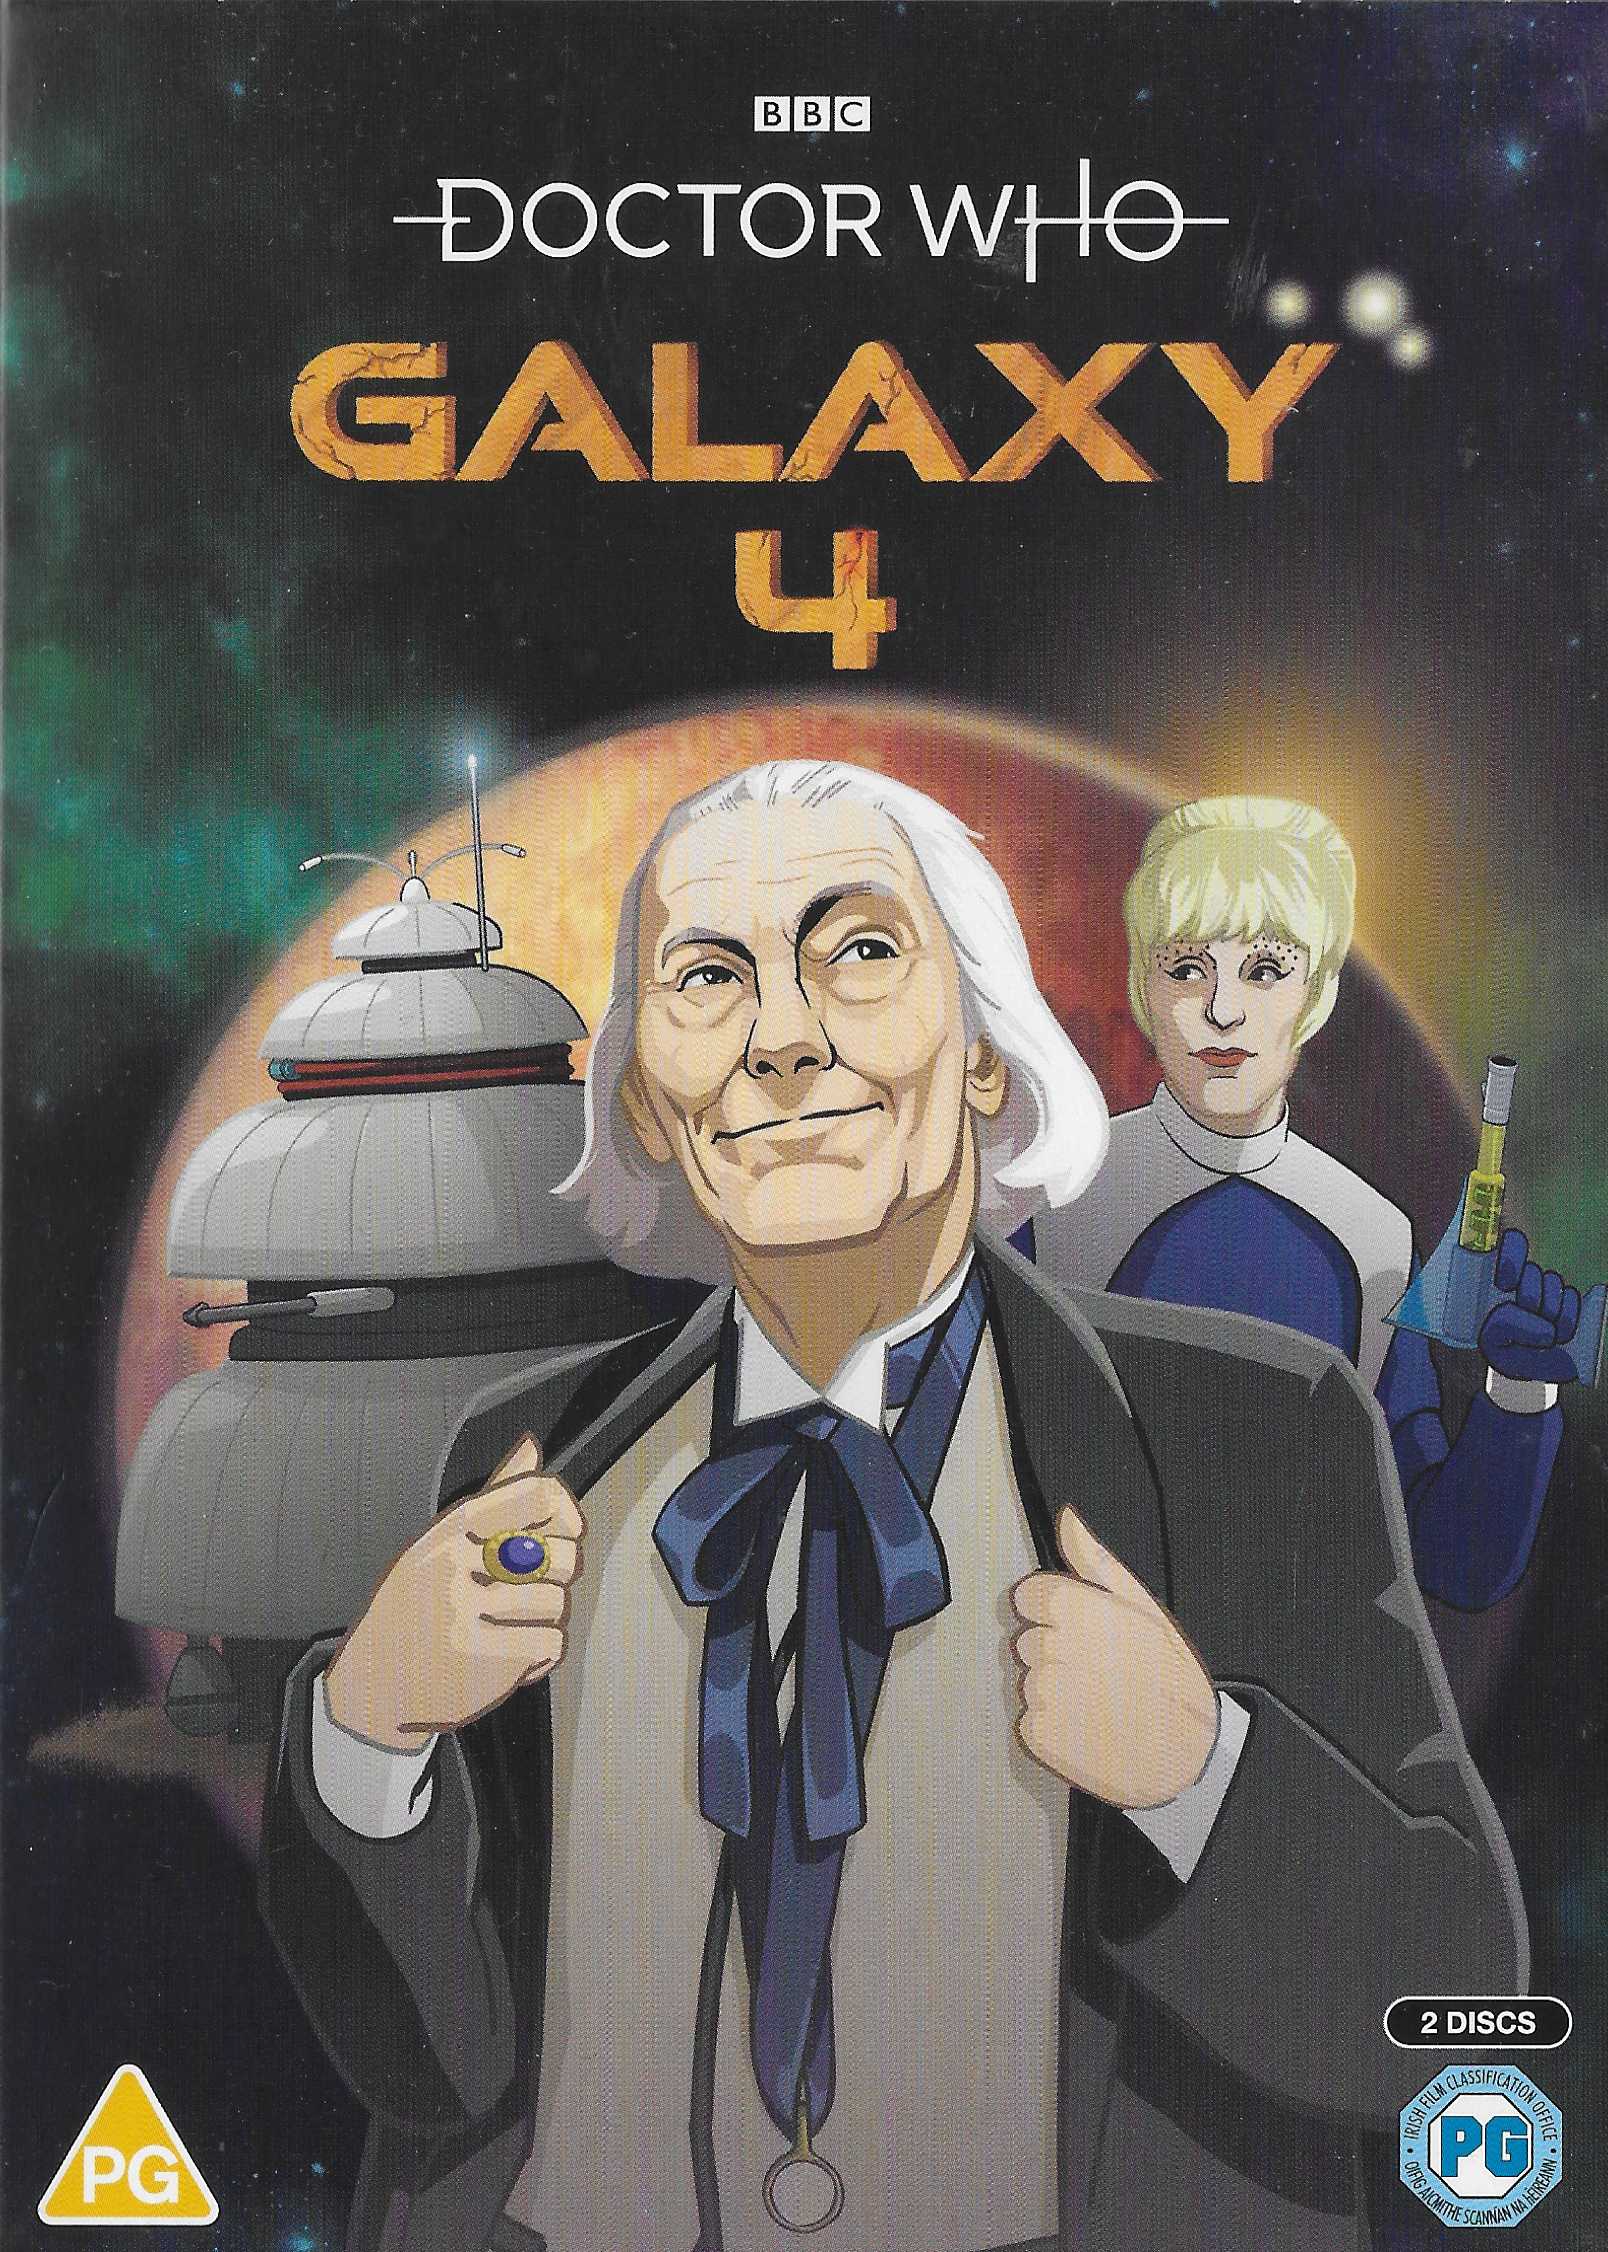 Picture of BBCDVD 4463 Doctor Who - Galaxy 4 by artist William Emms from the BBC dvds - Records and Tapes library